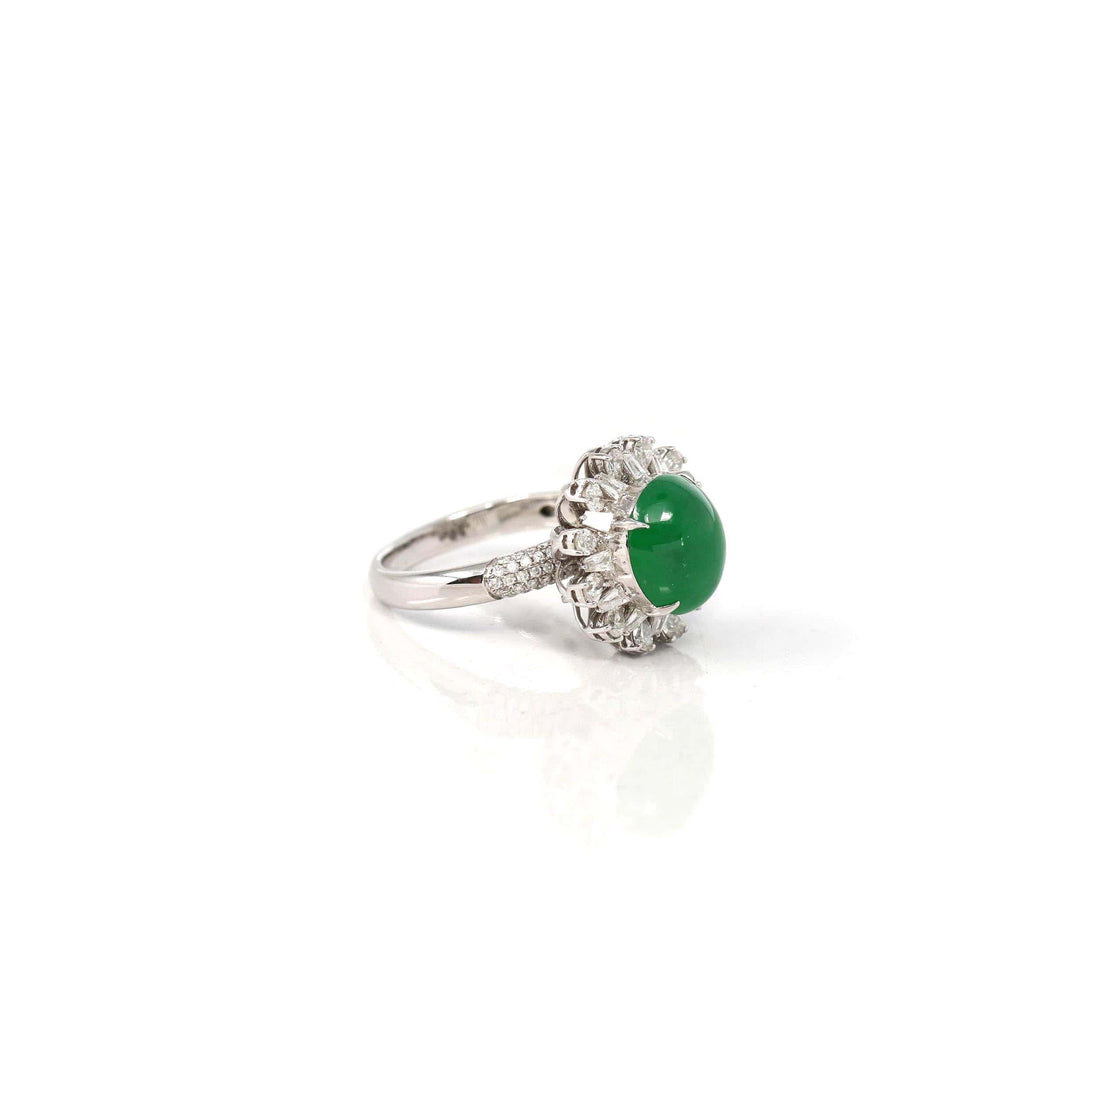 Baikalla Jewelry Jadeite Engagement Ring Copy of Copy of Copy of 18k White Gold Natural Imperial Green Jadeite Jade Engagement Ring With Diamonds